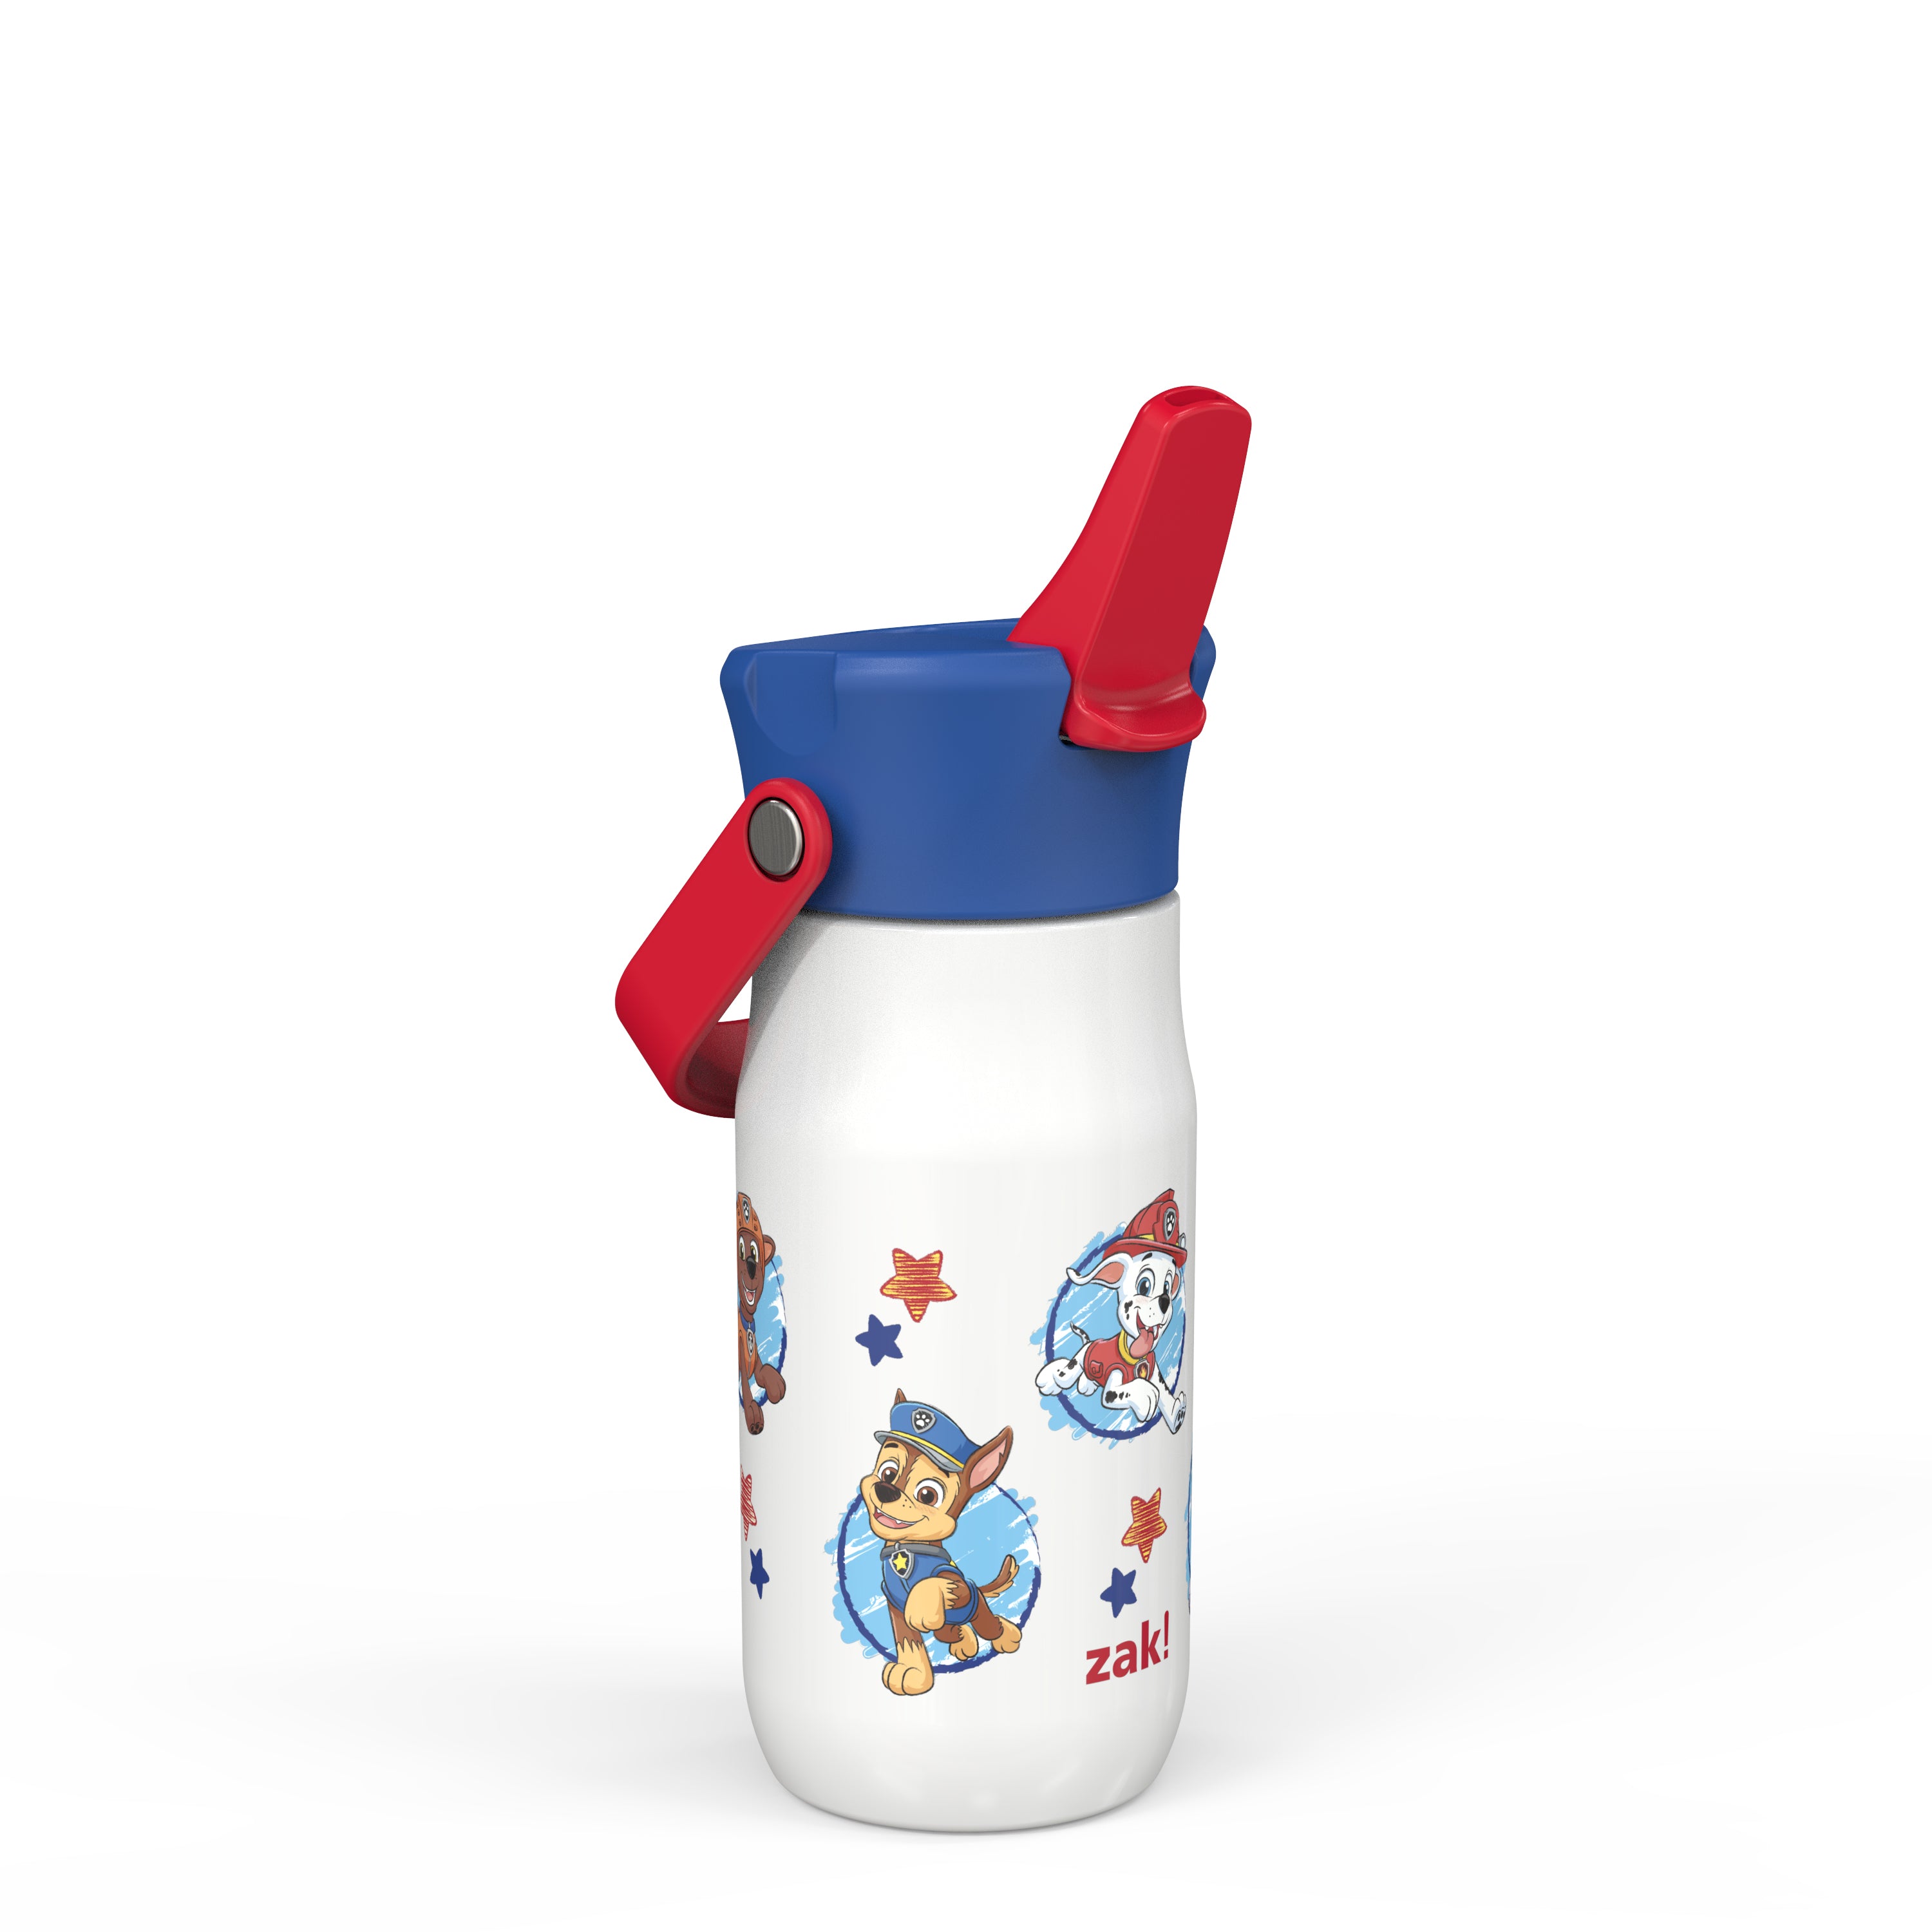 PAW Patrol Harmony Recycled Stainless Steel Kids Water Bottle with